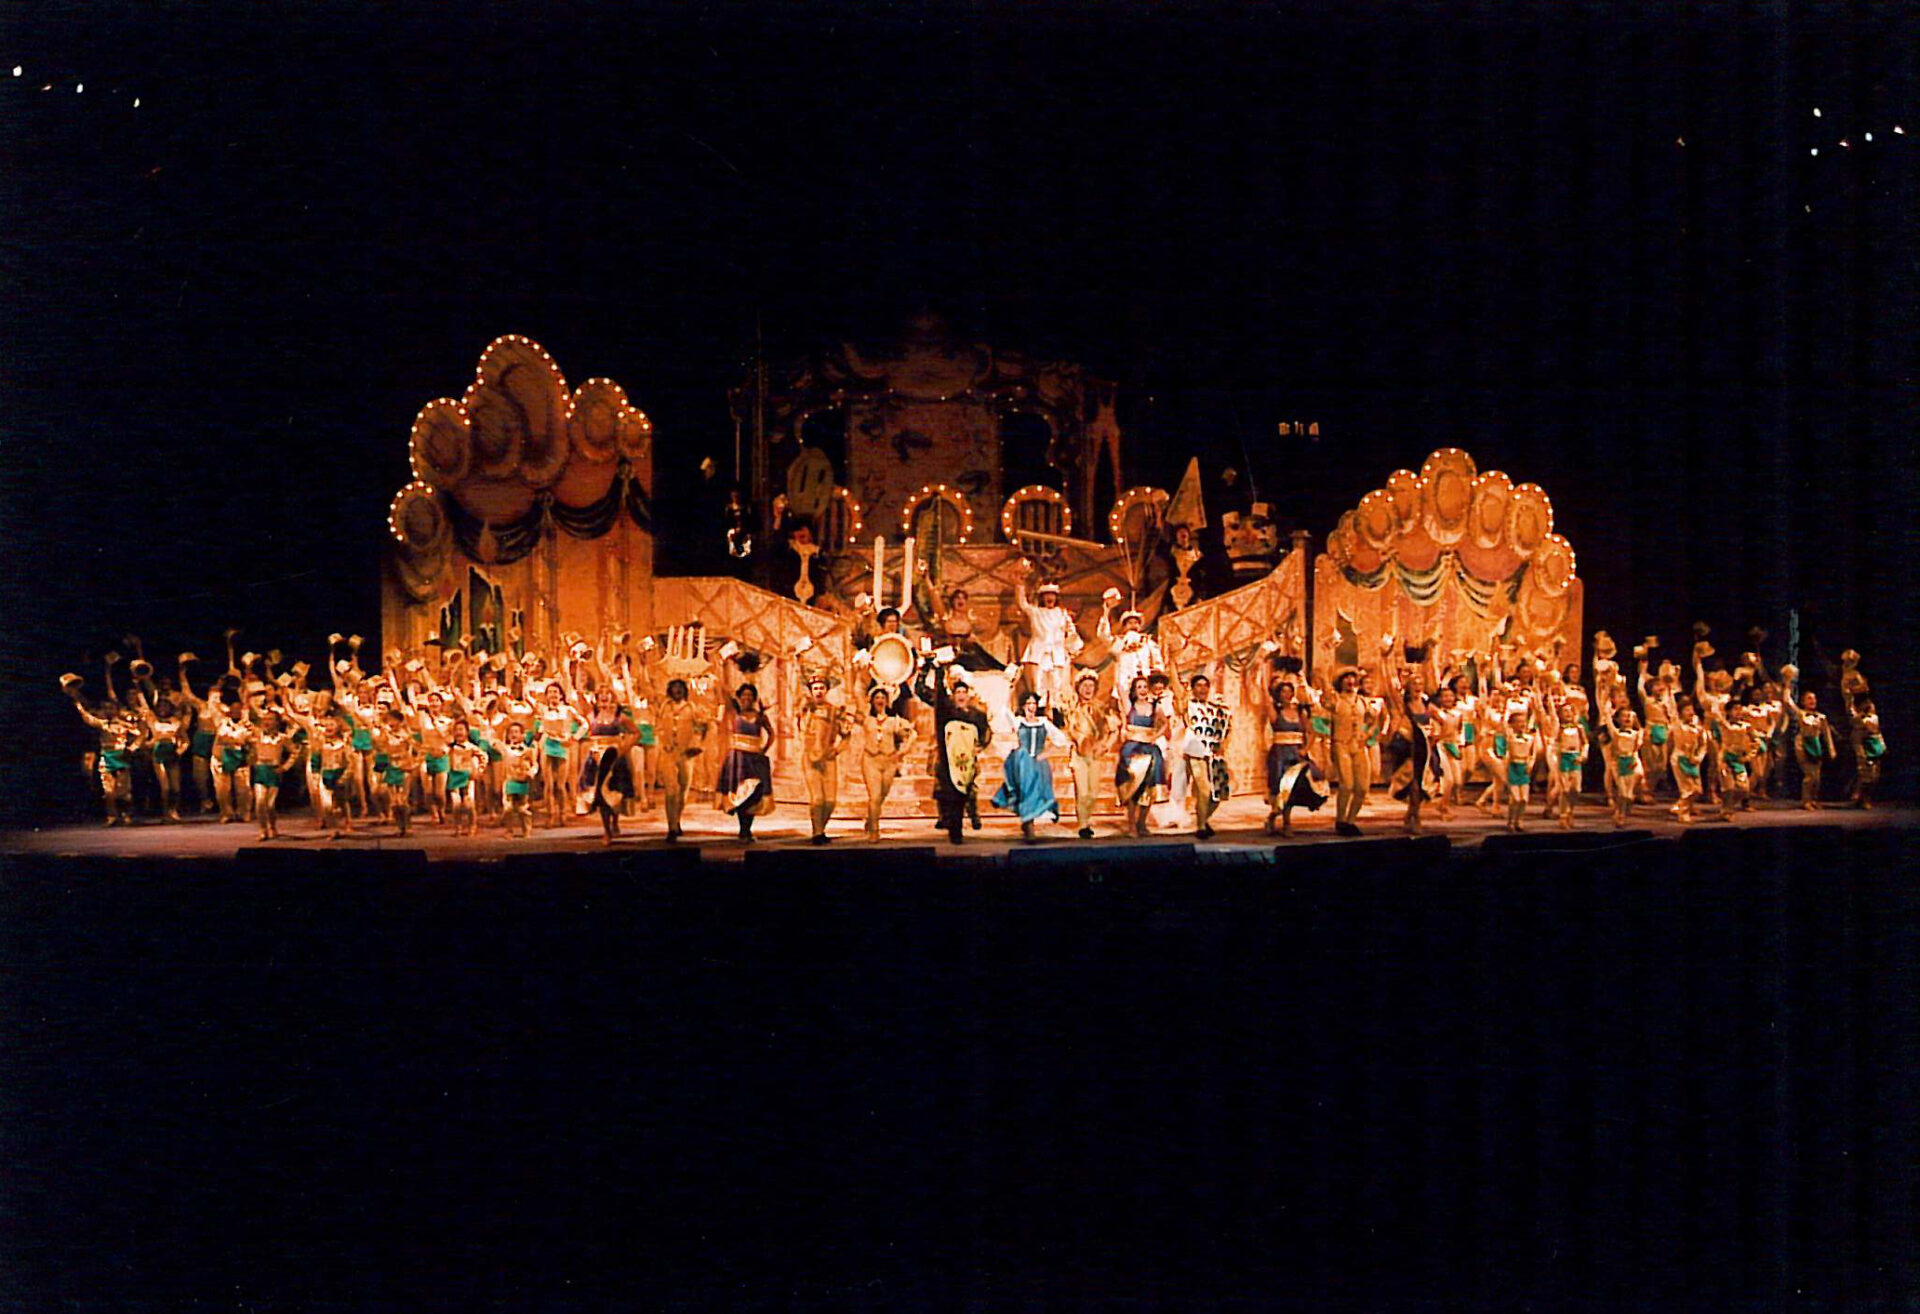 On Stage Image of the 2005 Beauty and The Beast Cast Performing